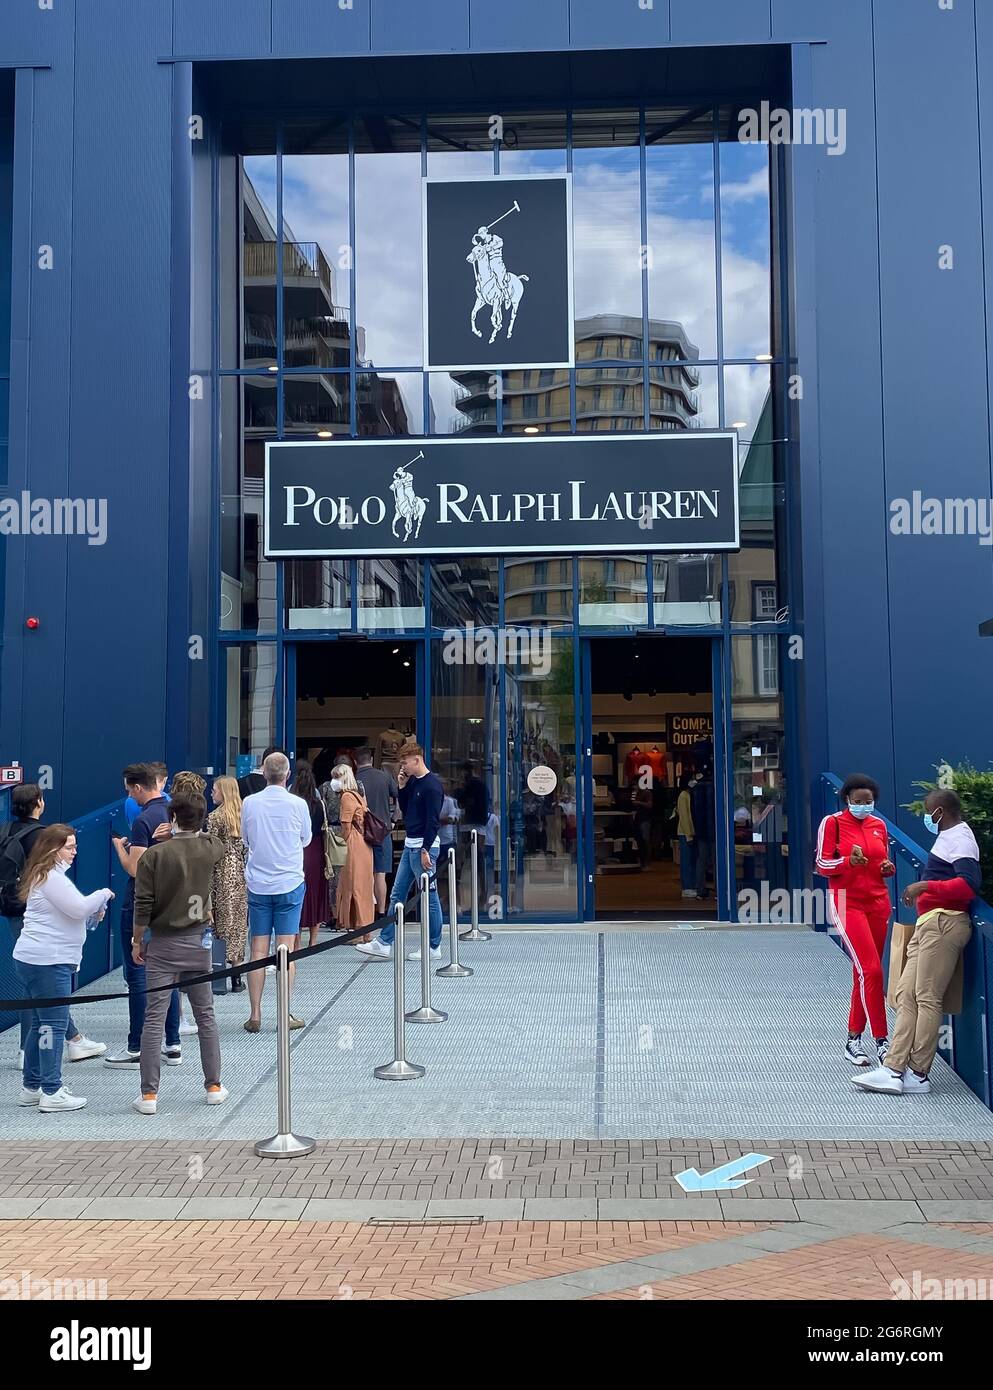 Roermond, Netherlands - July 1. 2021: View on blue facade of polo ralph  lauren fashion store with queue of people exterior of entrance Stock Photo  - Alamy